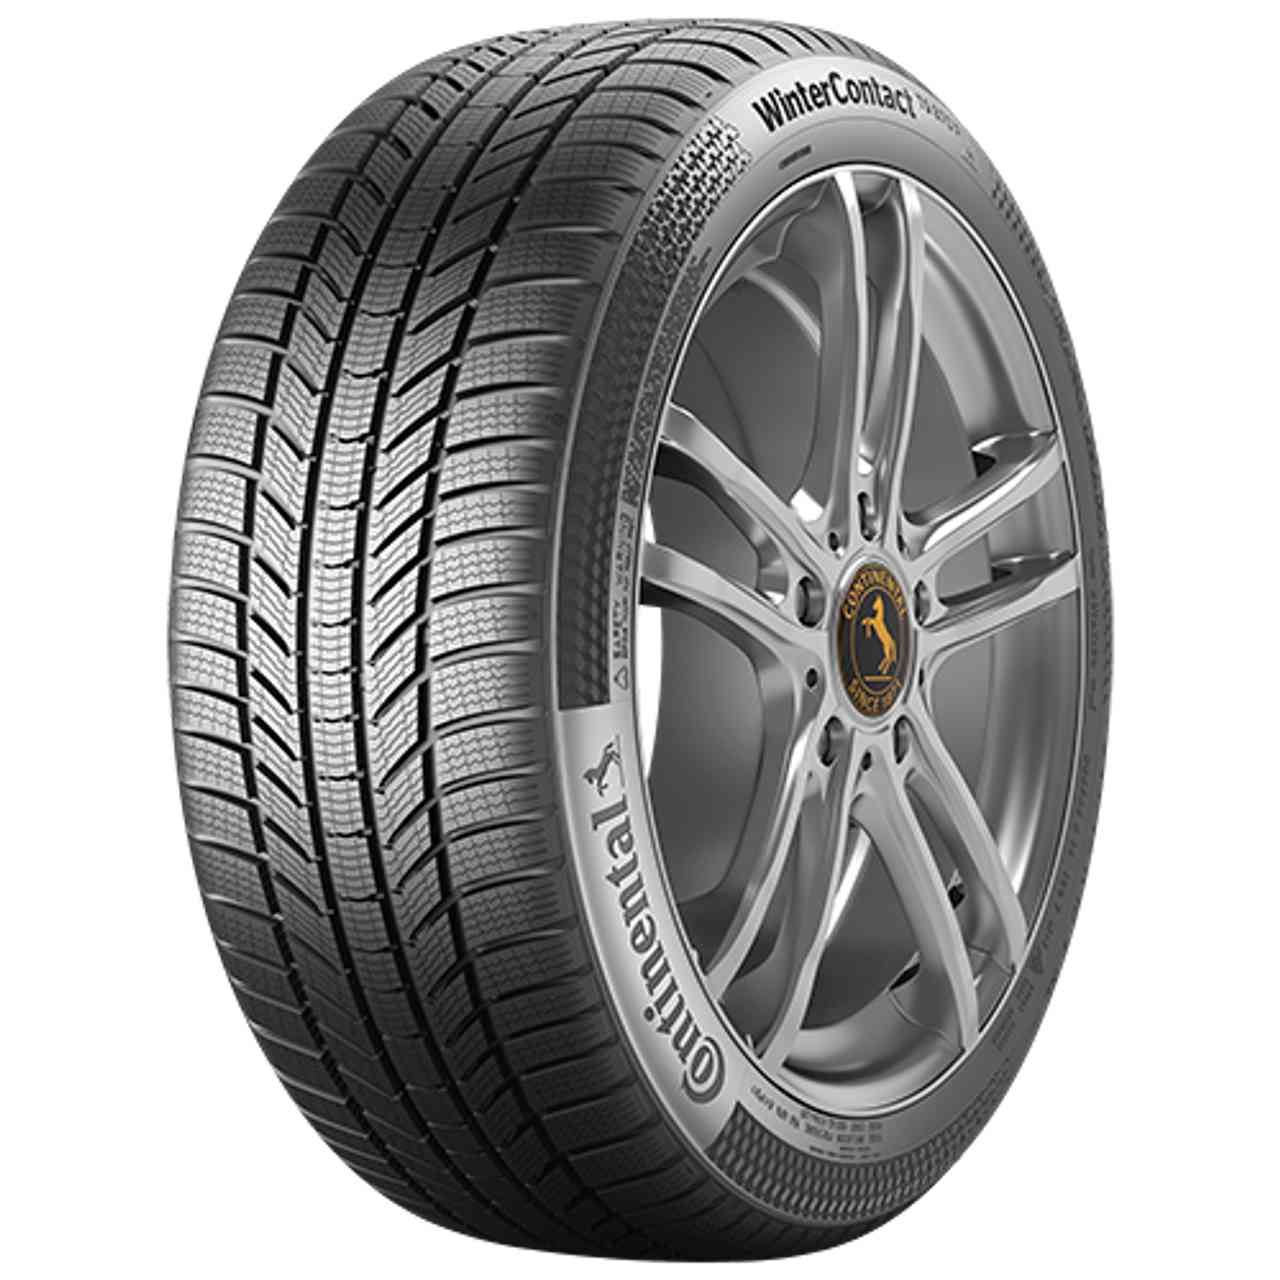 CONTINENTAL WINTERCONTACT TS 870 P (EVc) 275/50R20 113V FR BSW von Continental